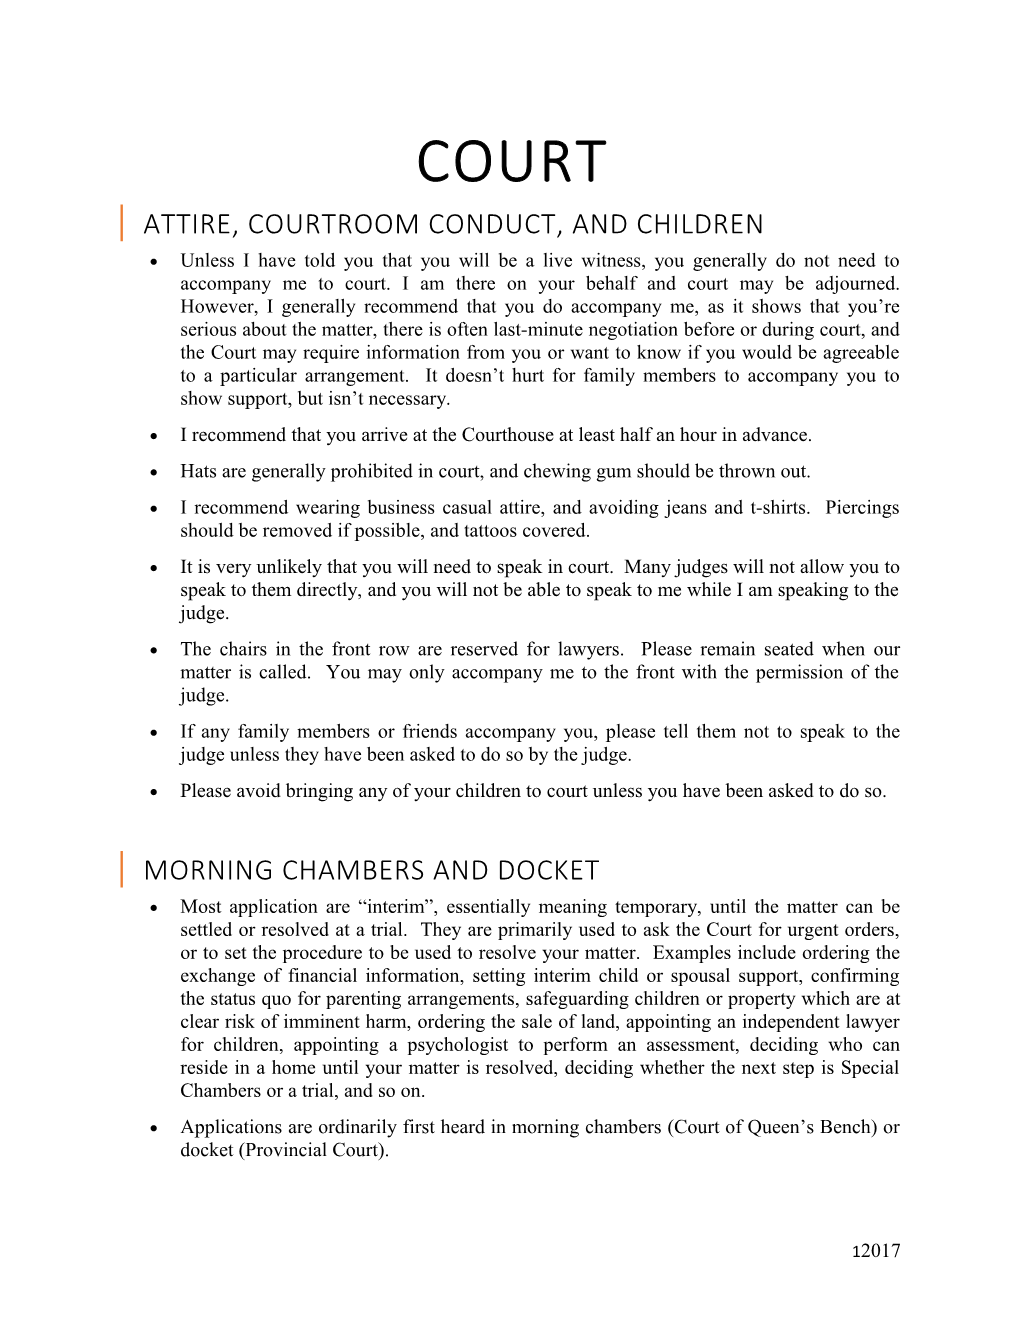 Attire, Courtroom Conduct, and Children